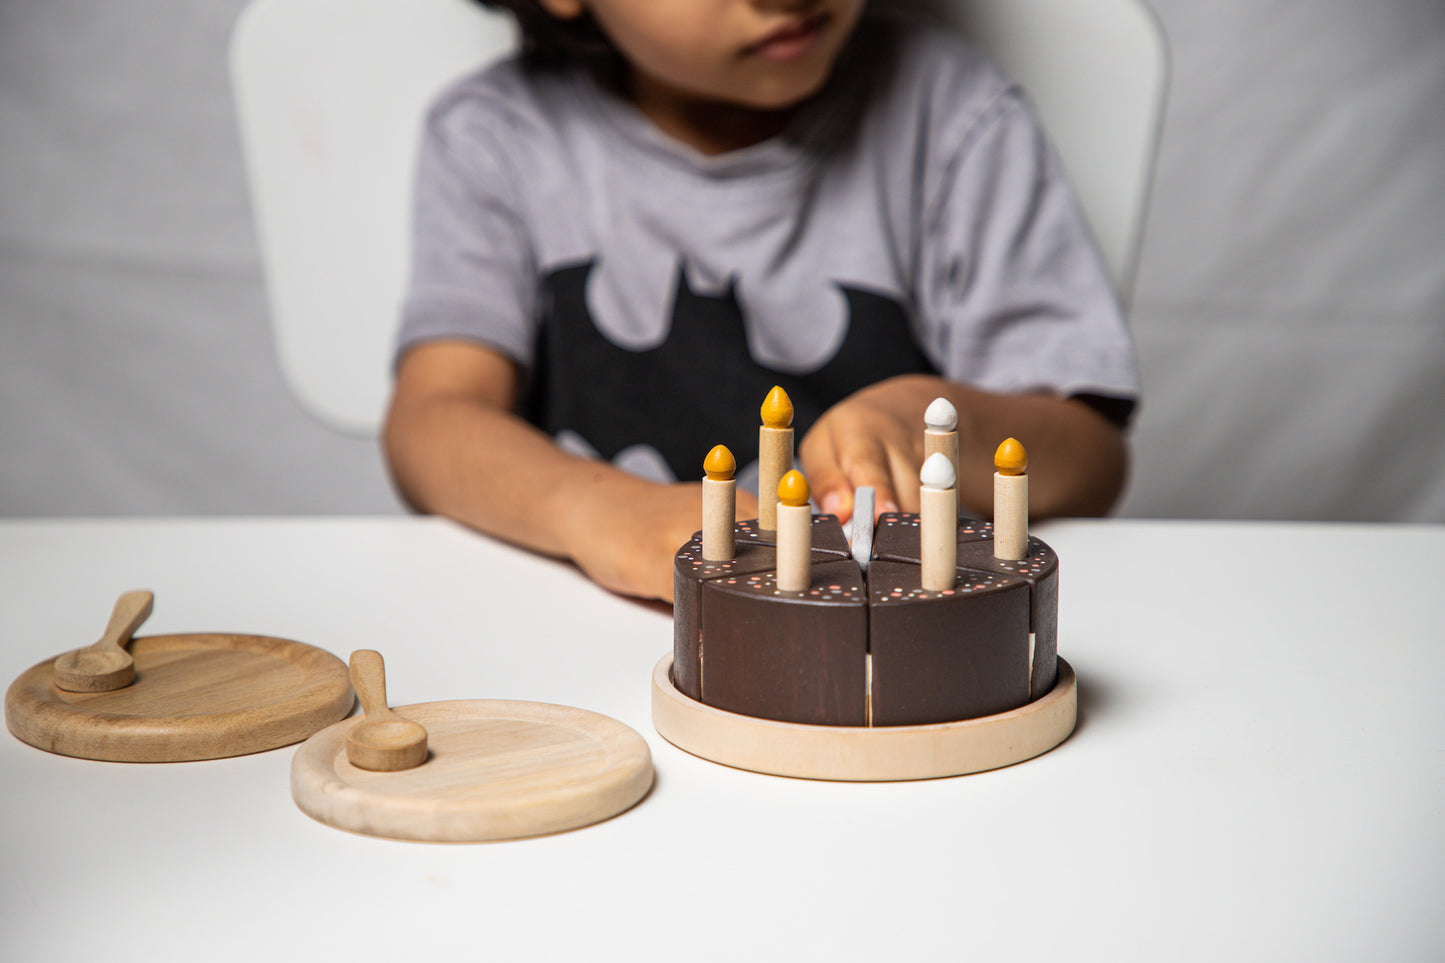 Birch Party Cake PlaySet - 18 pieces